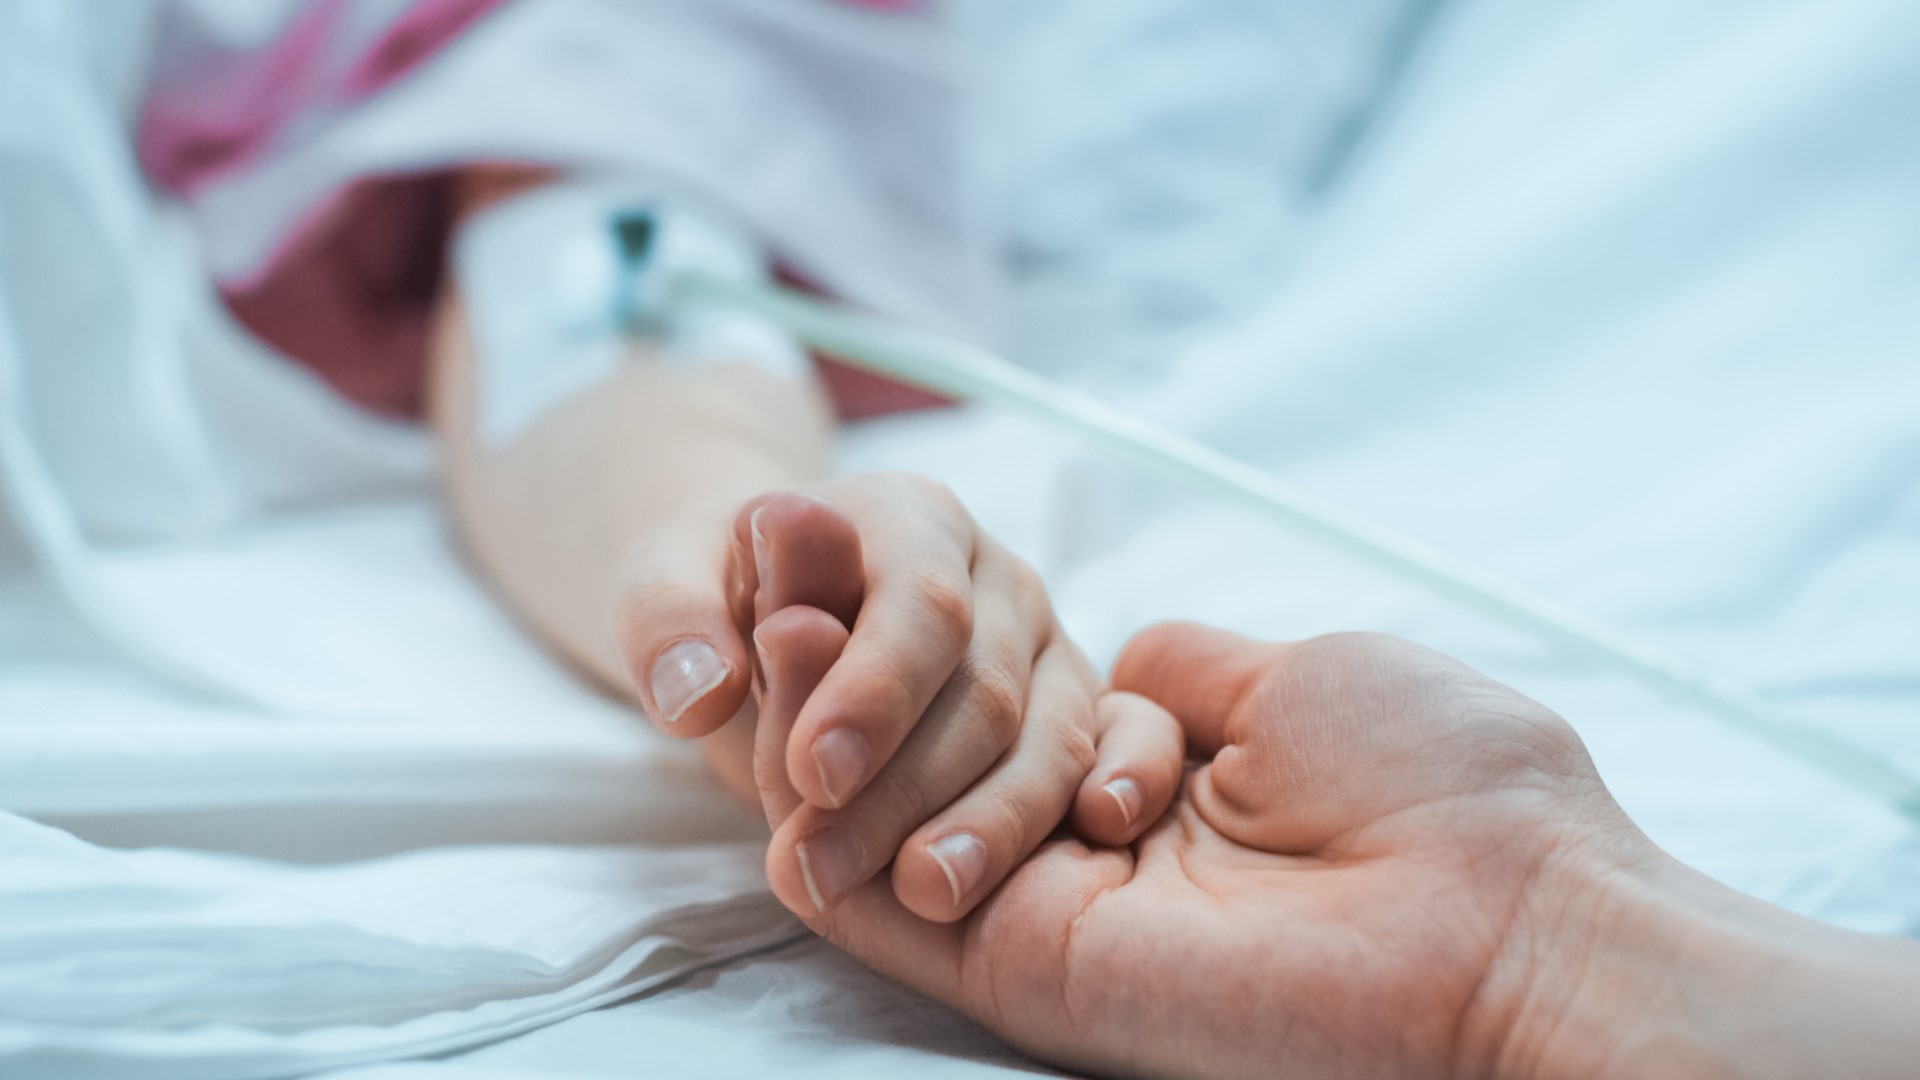 Doctors say most children aren't showing signs or symptoms of 'pediatric multi-system inflammatory syndrome' until about a month after a COVID-19 infection.